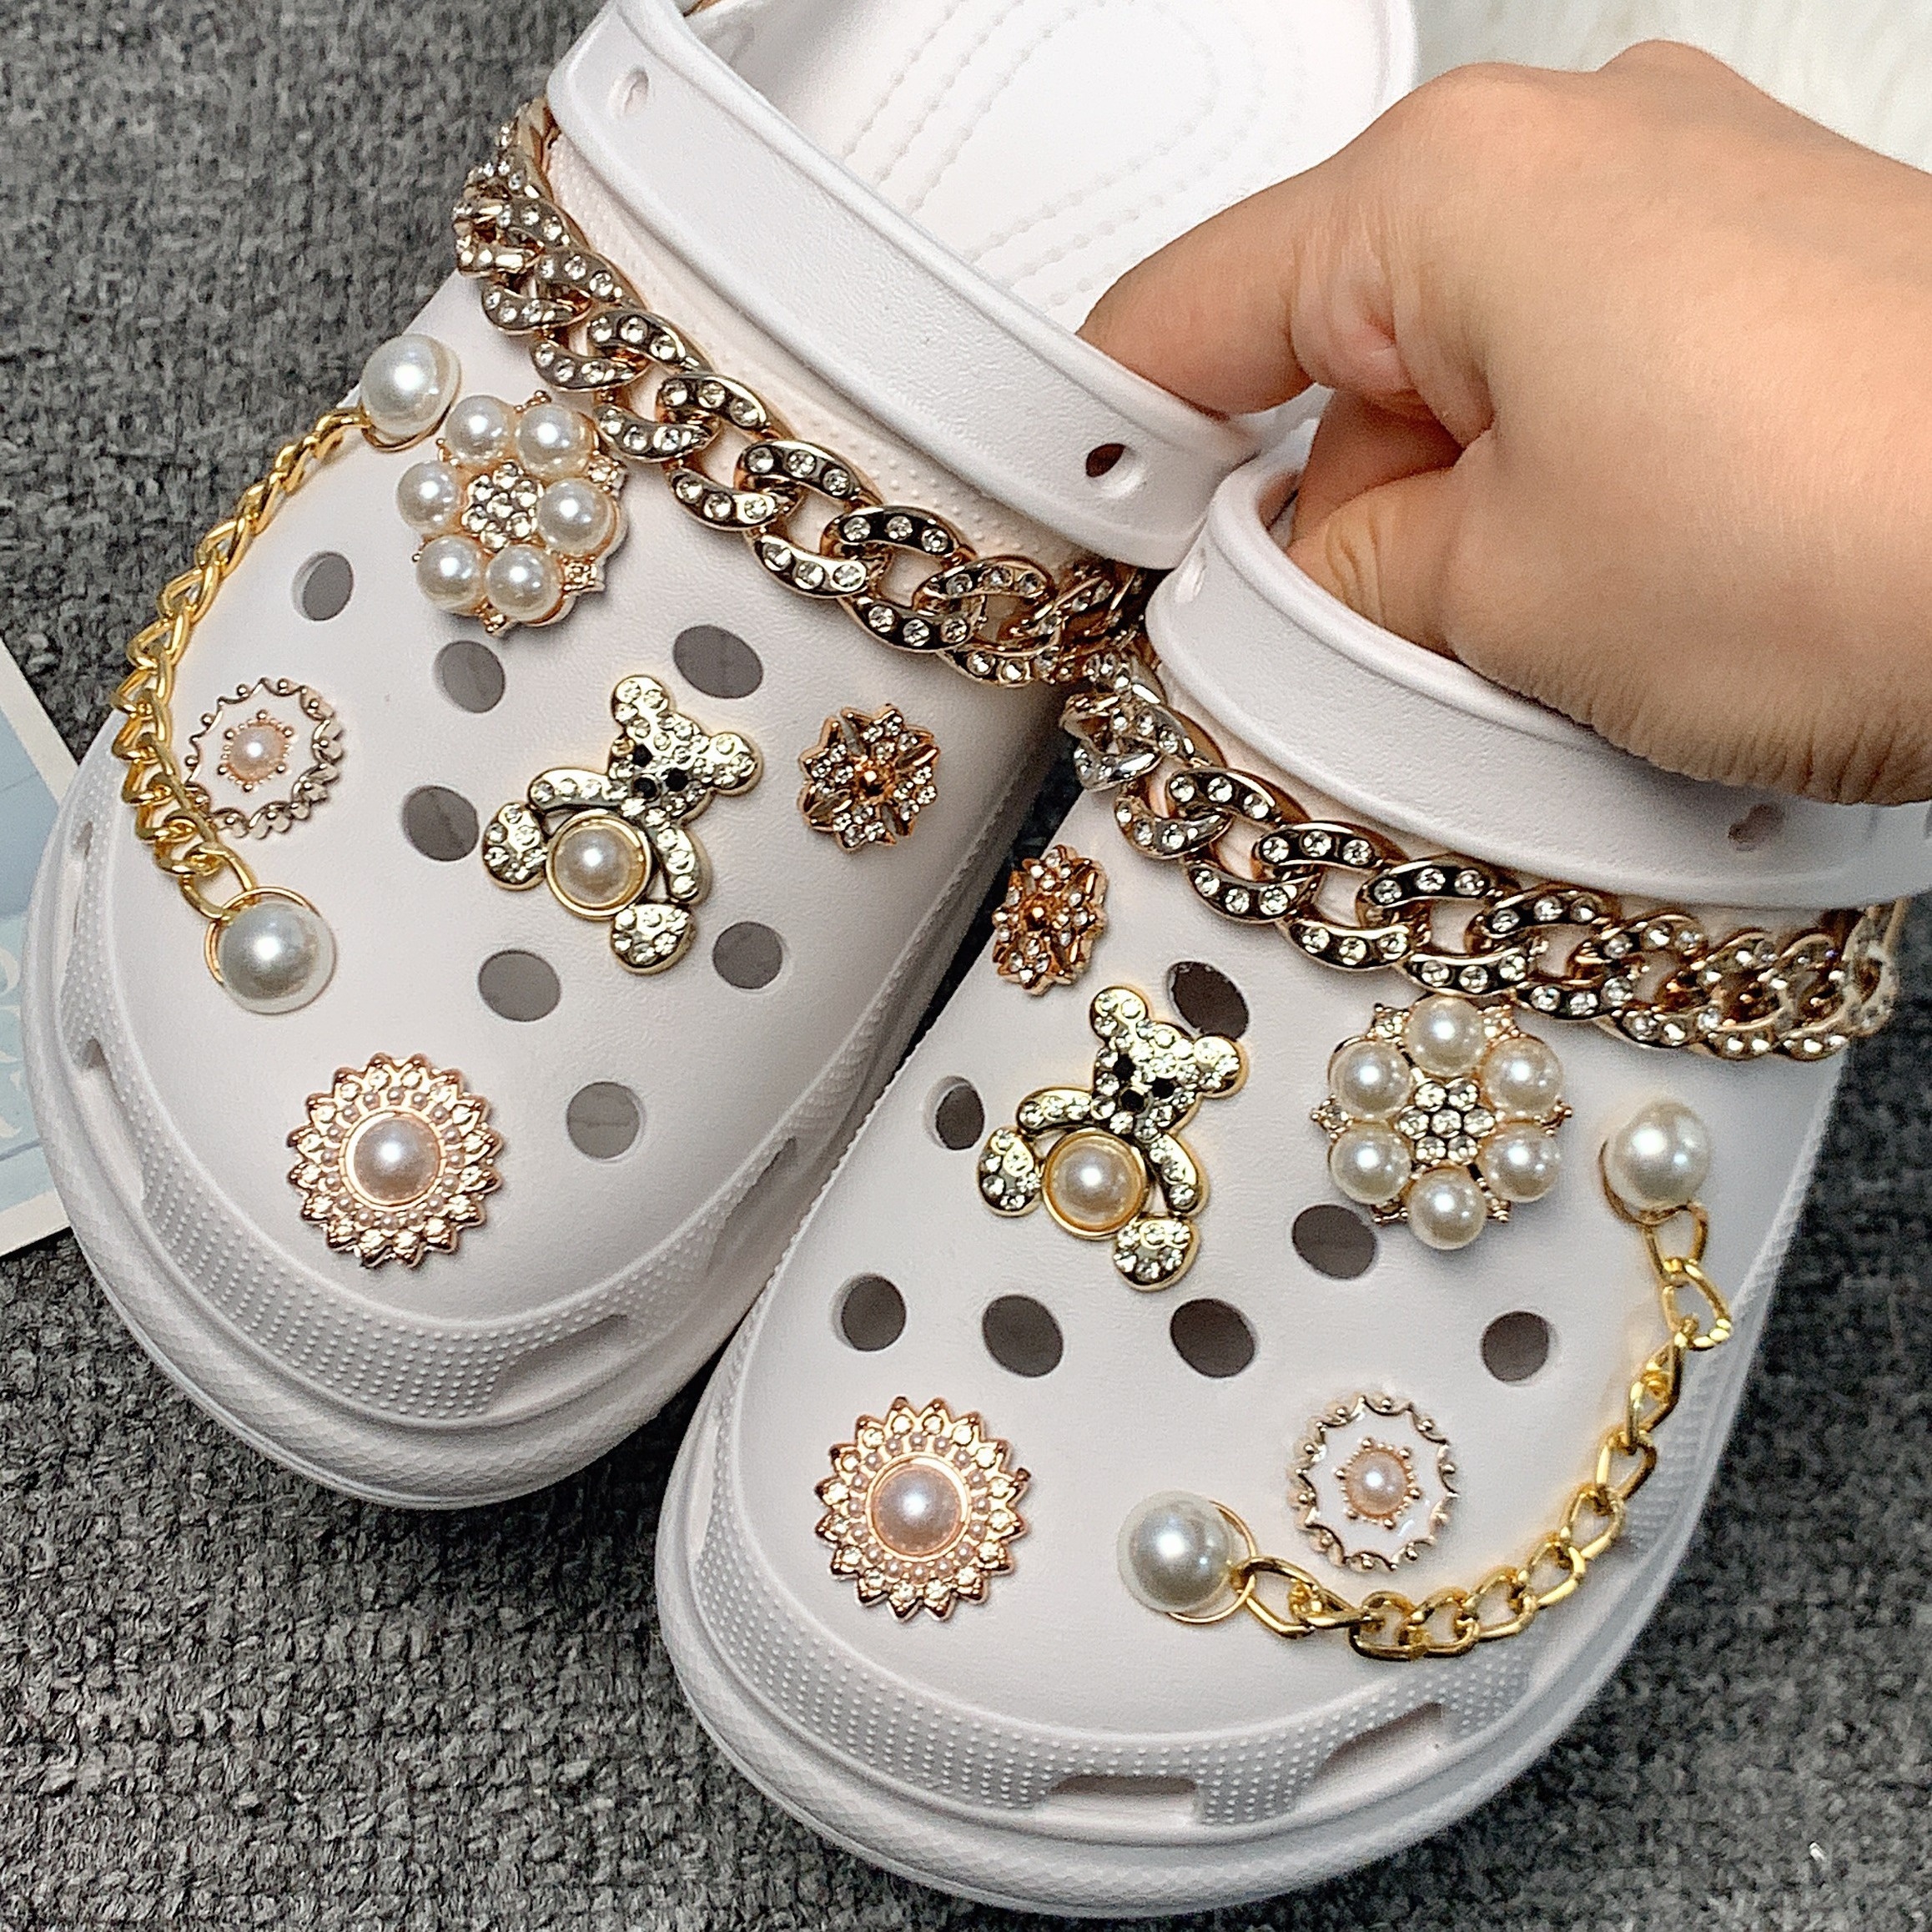 Original Dollar PVC Croc Charms Jeans Clogs Funny Shoes Accessories Kawaii  Buckle Decorations For Adult Kids X-mas Party Gifts